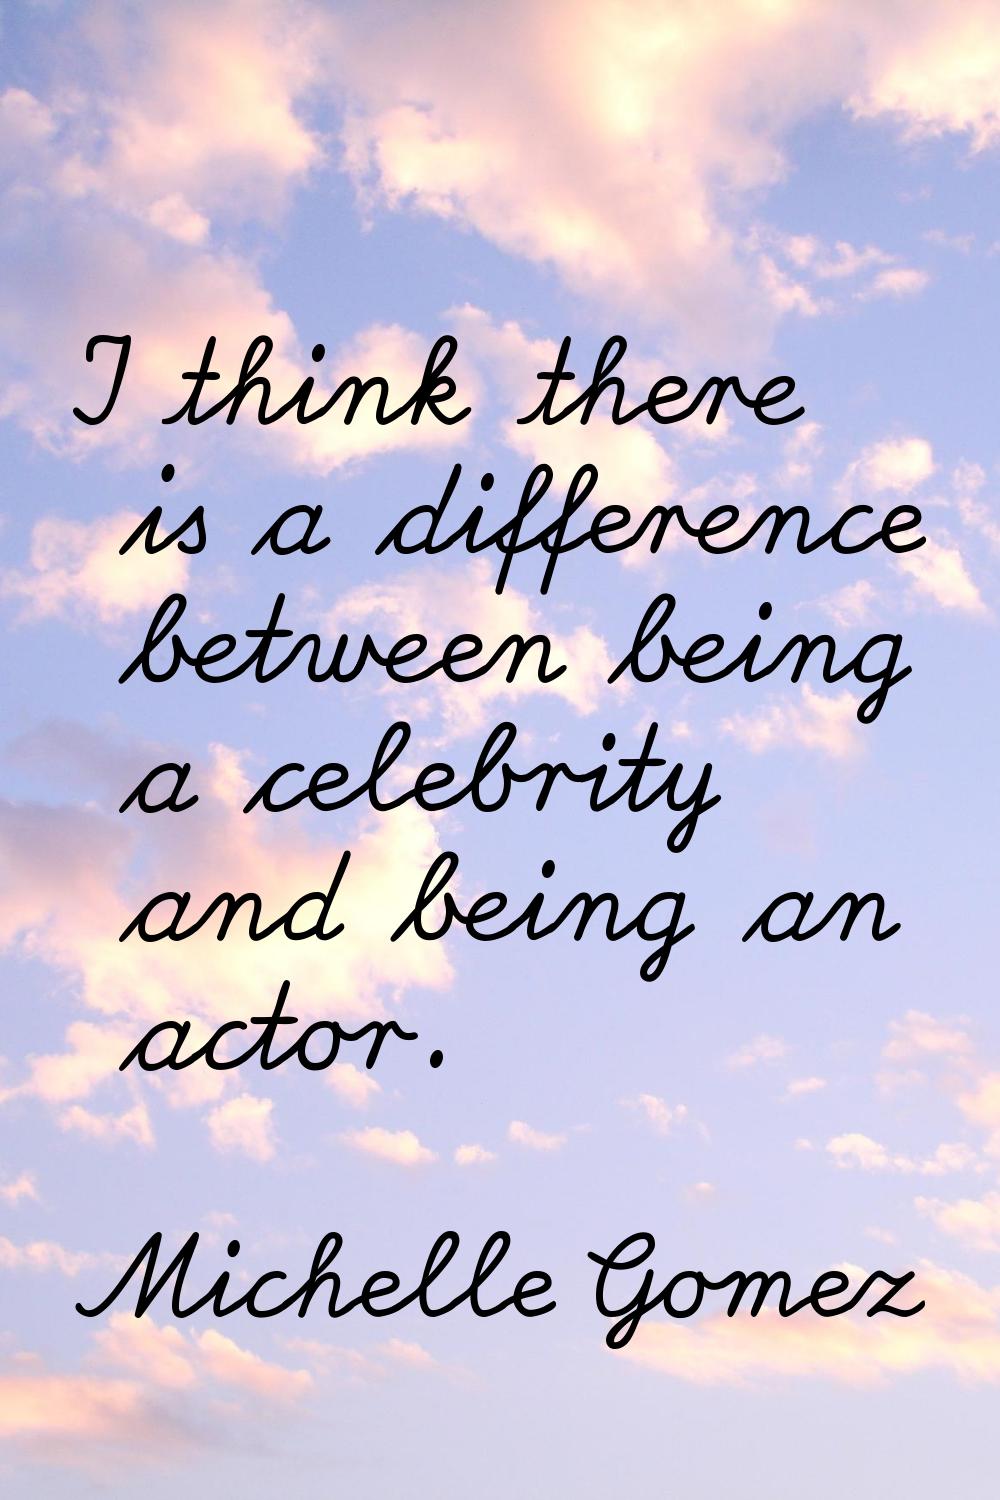 I think there is a difference between being a celebrity and being an actor.